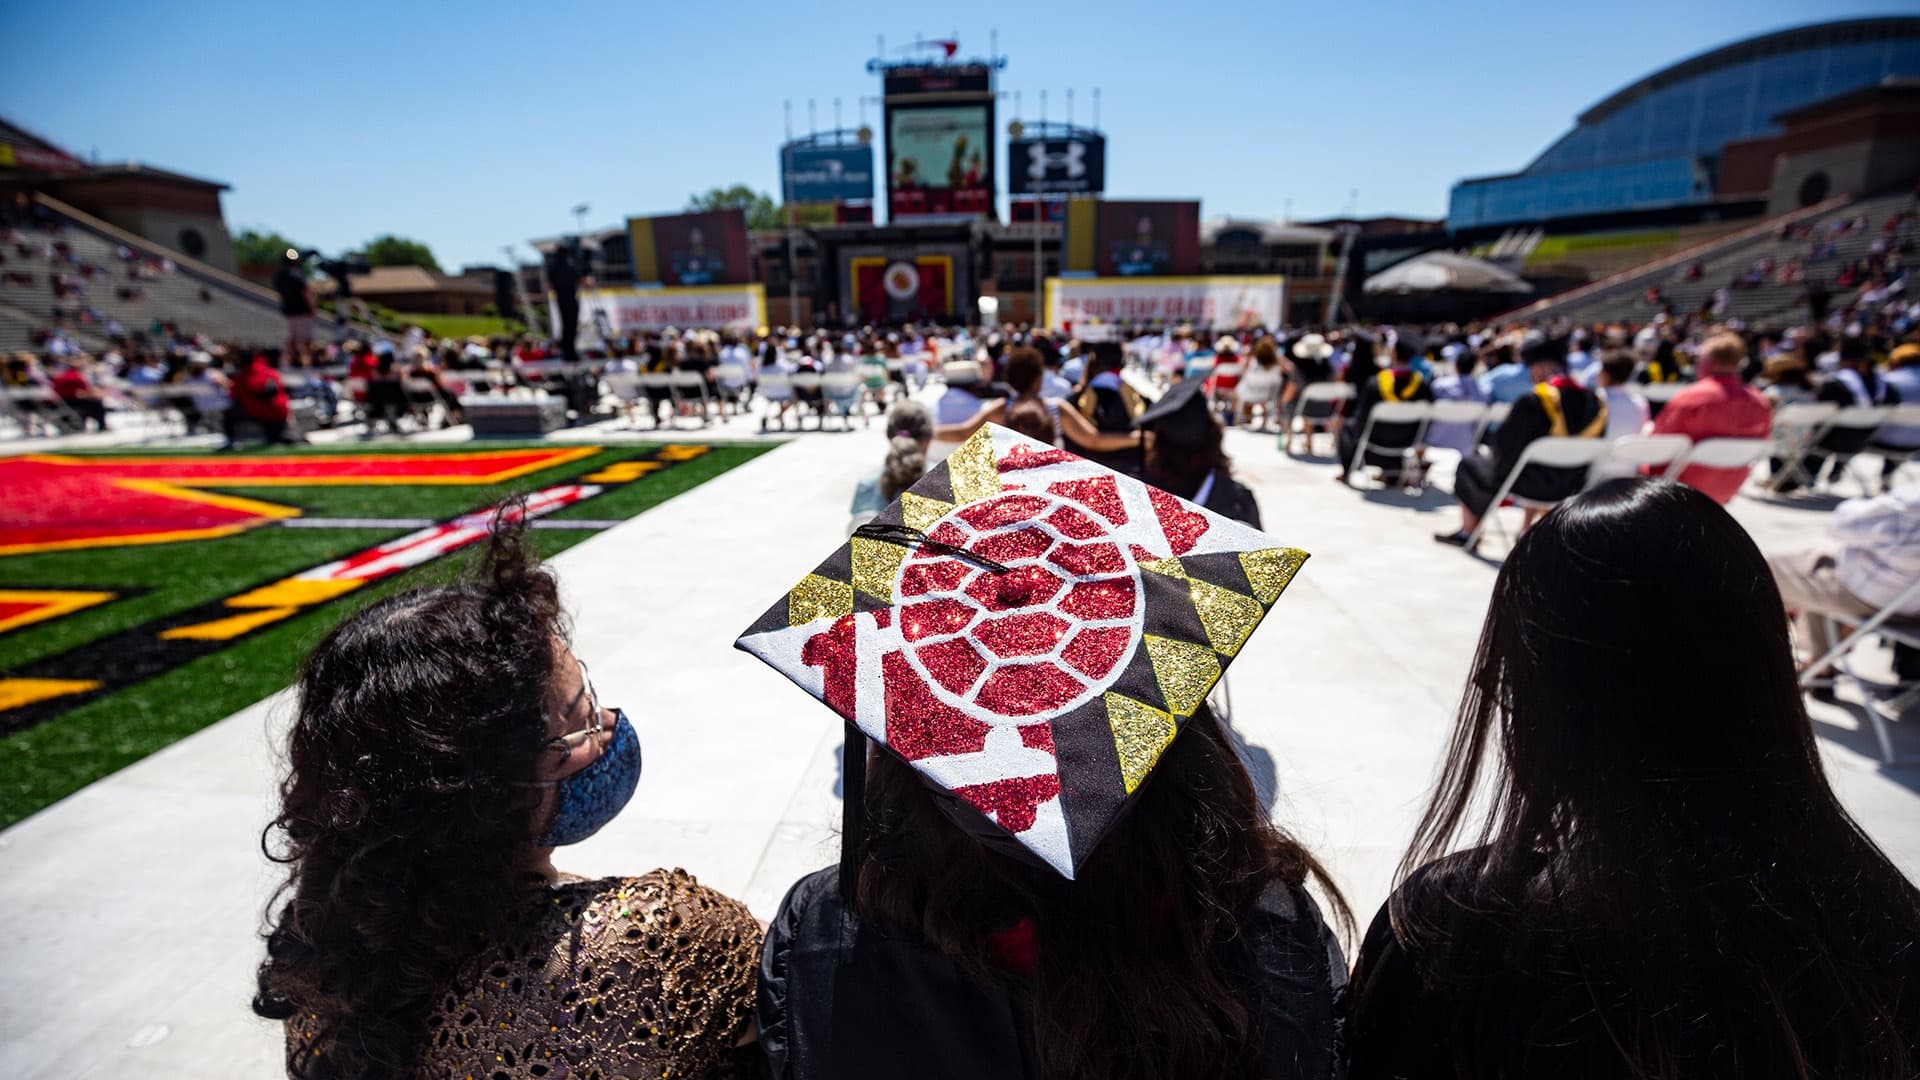 Decorated grad cap at outdoor commencement